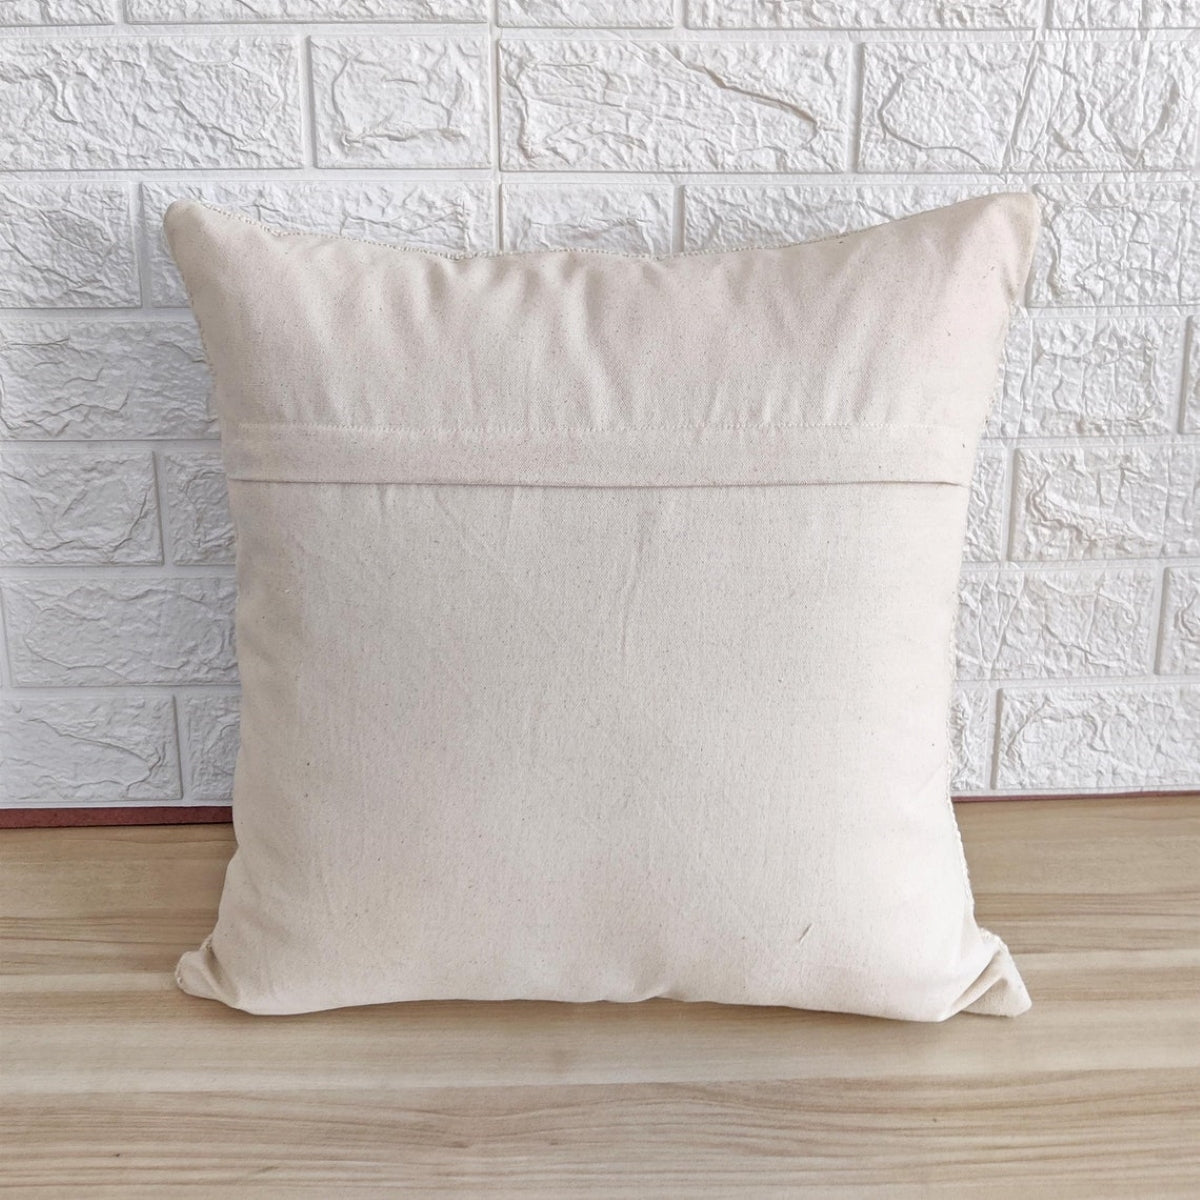 Ivory & Mustard Yellow Handtufted Cushion Cover